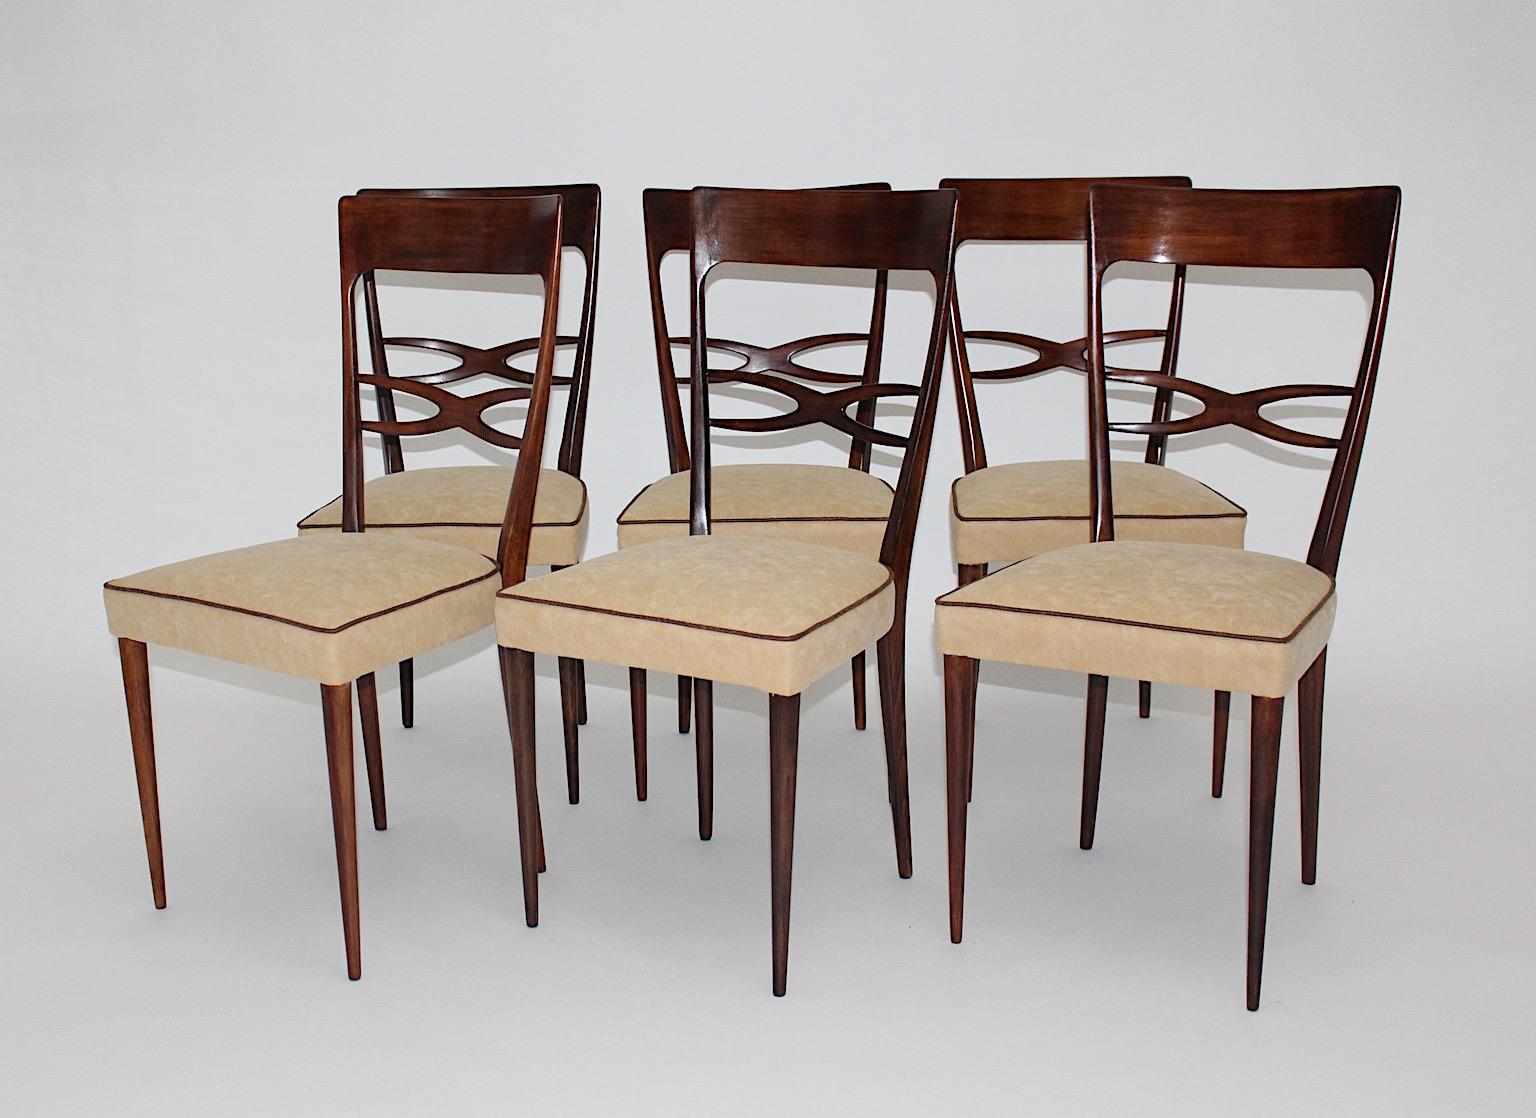 Stained Mid-Century Modern Six Dining Chairs Brown Beech Melchiorre Bega, 1950, Italy